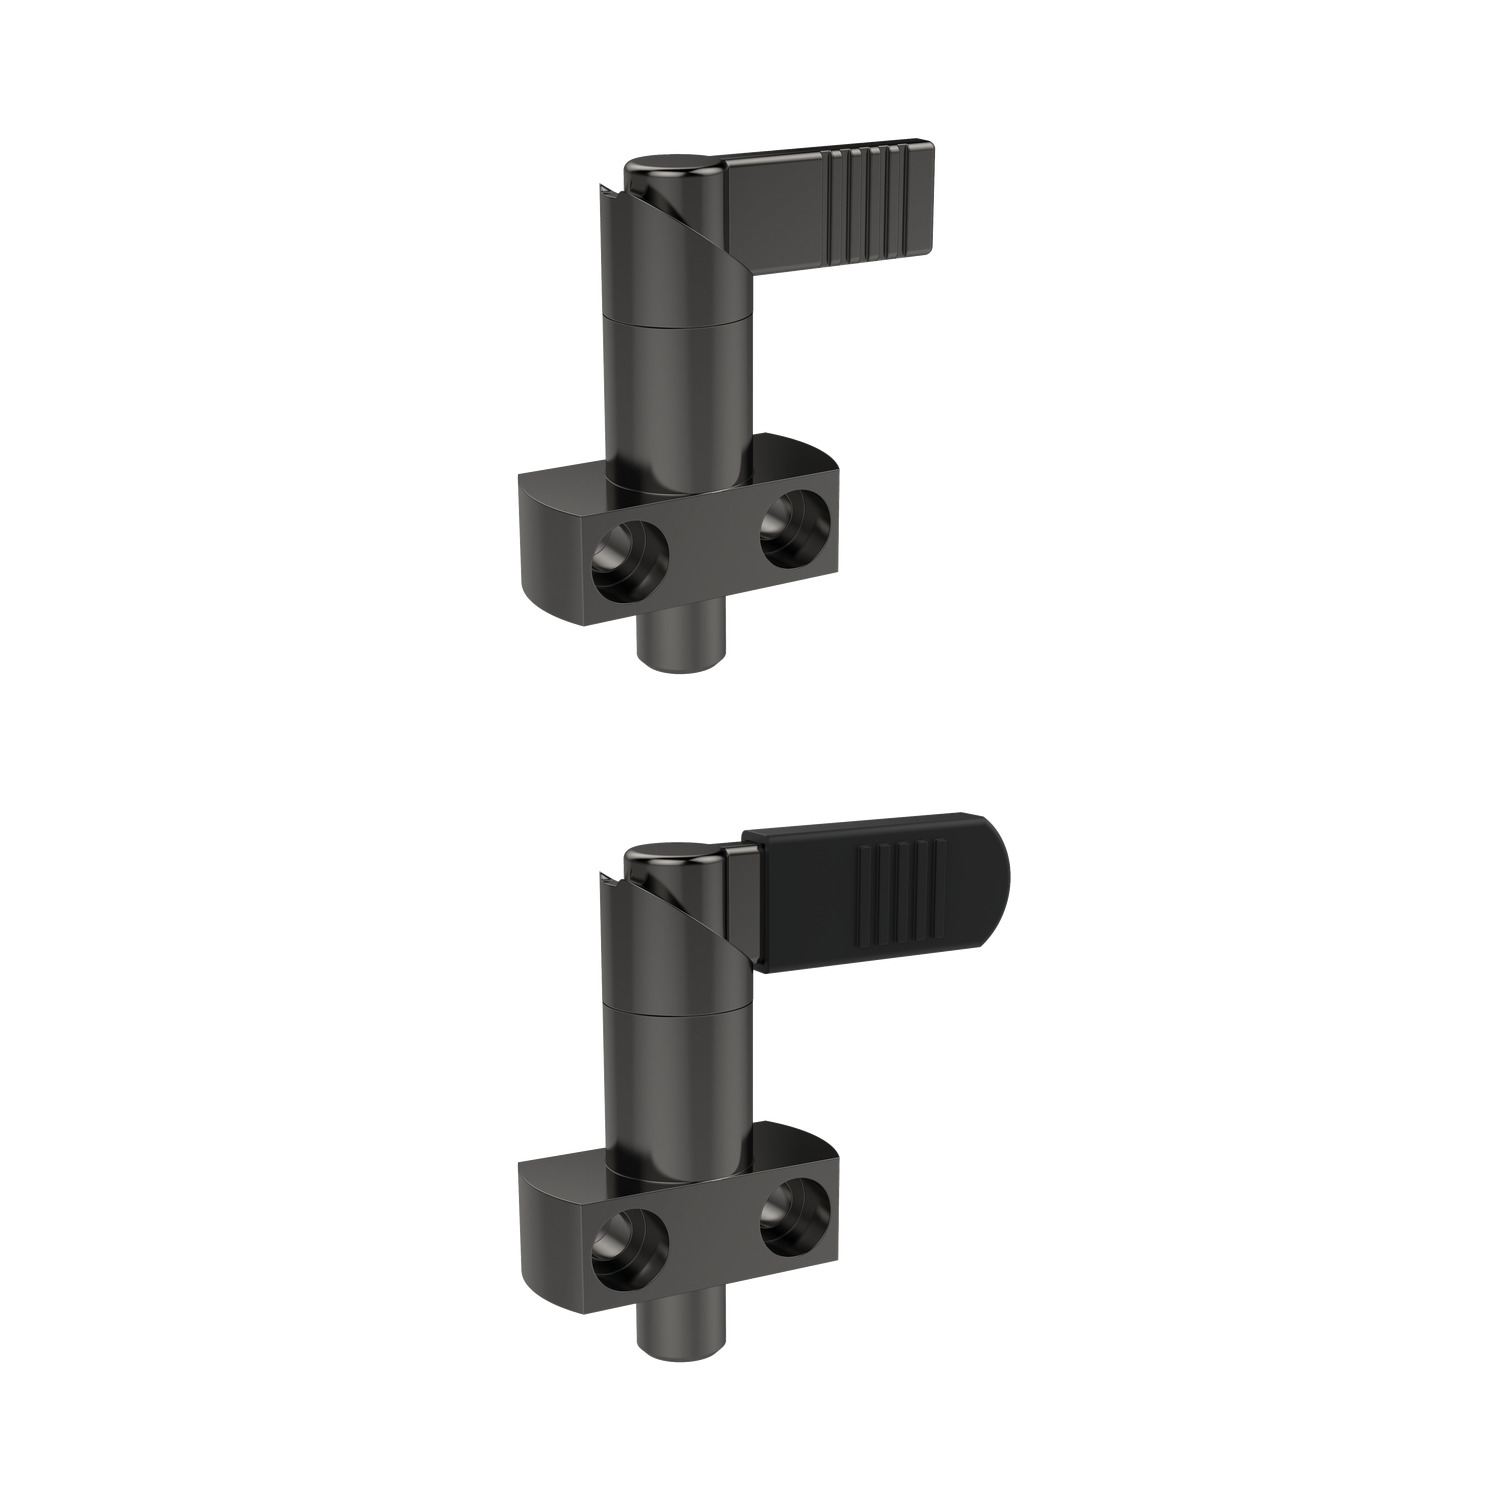 Index Plungers - Lever Grip A transverse flange mounting model with countersunk mounting holes on both sides to enable either right or left mounting. Easy grip lever.